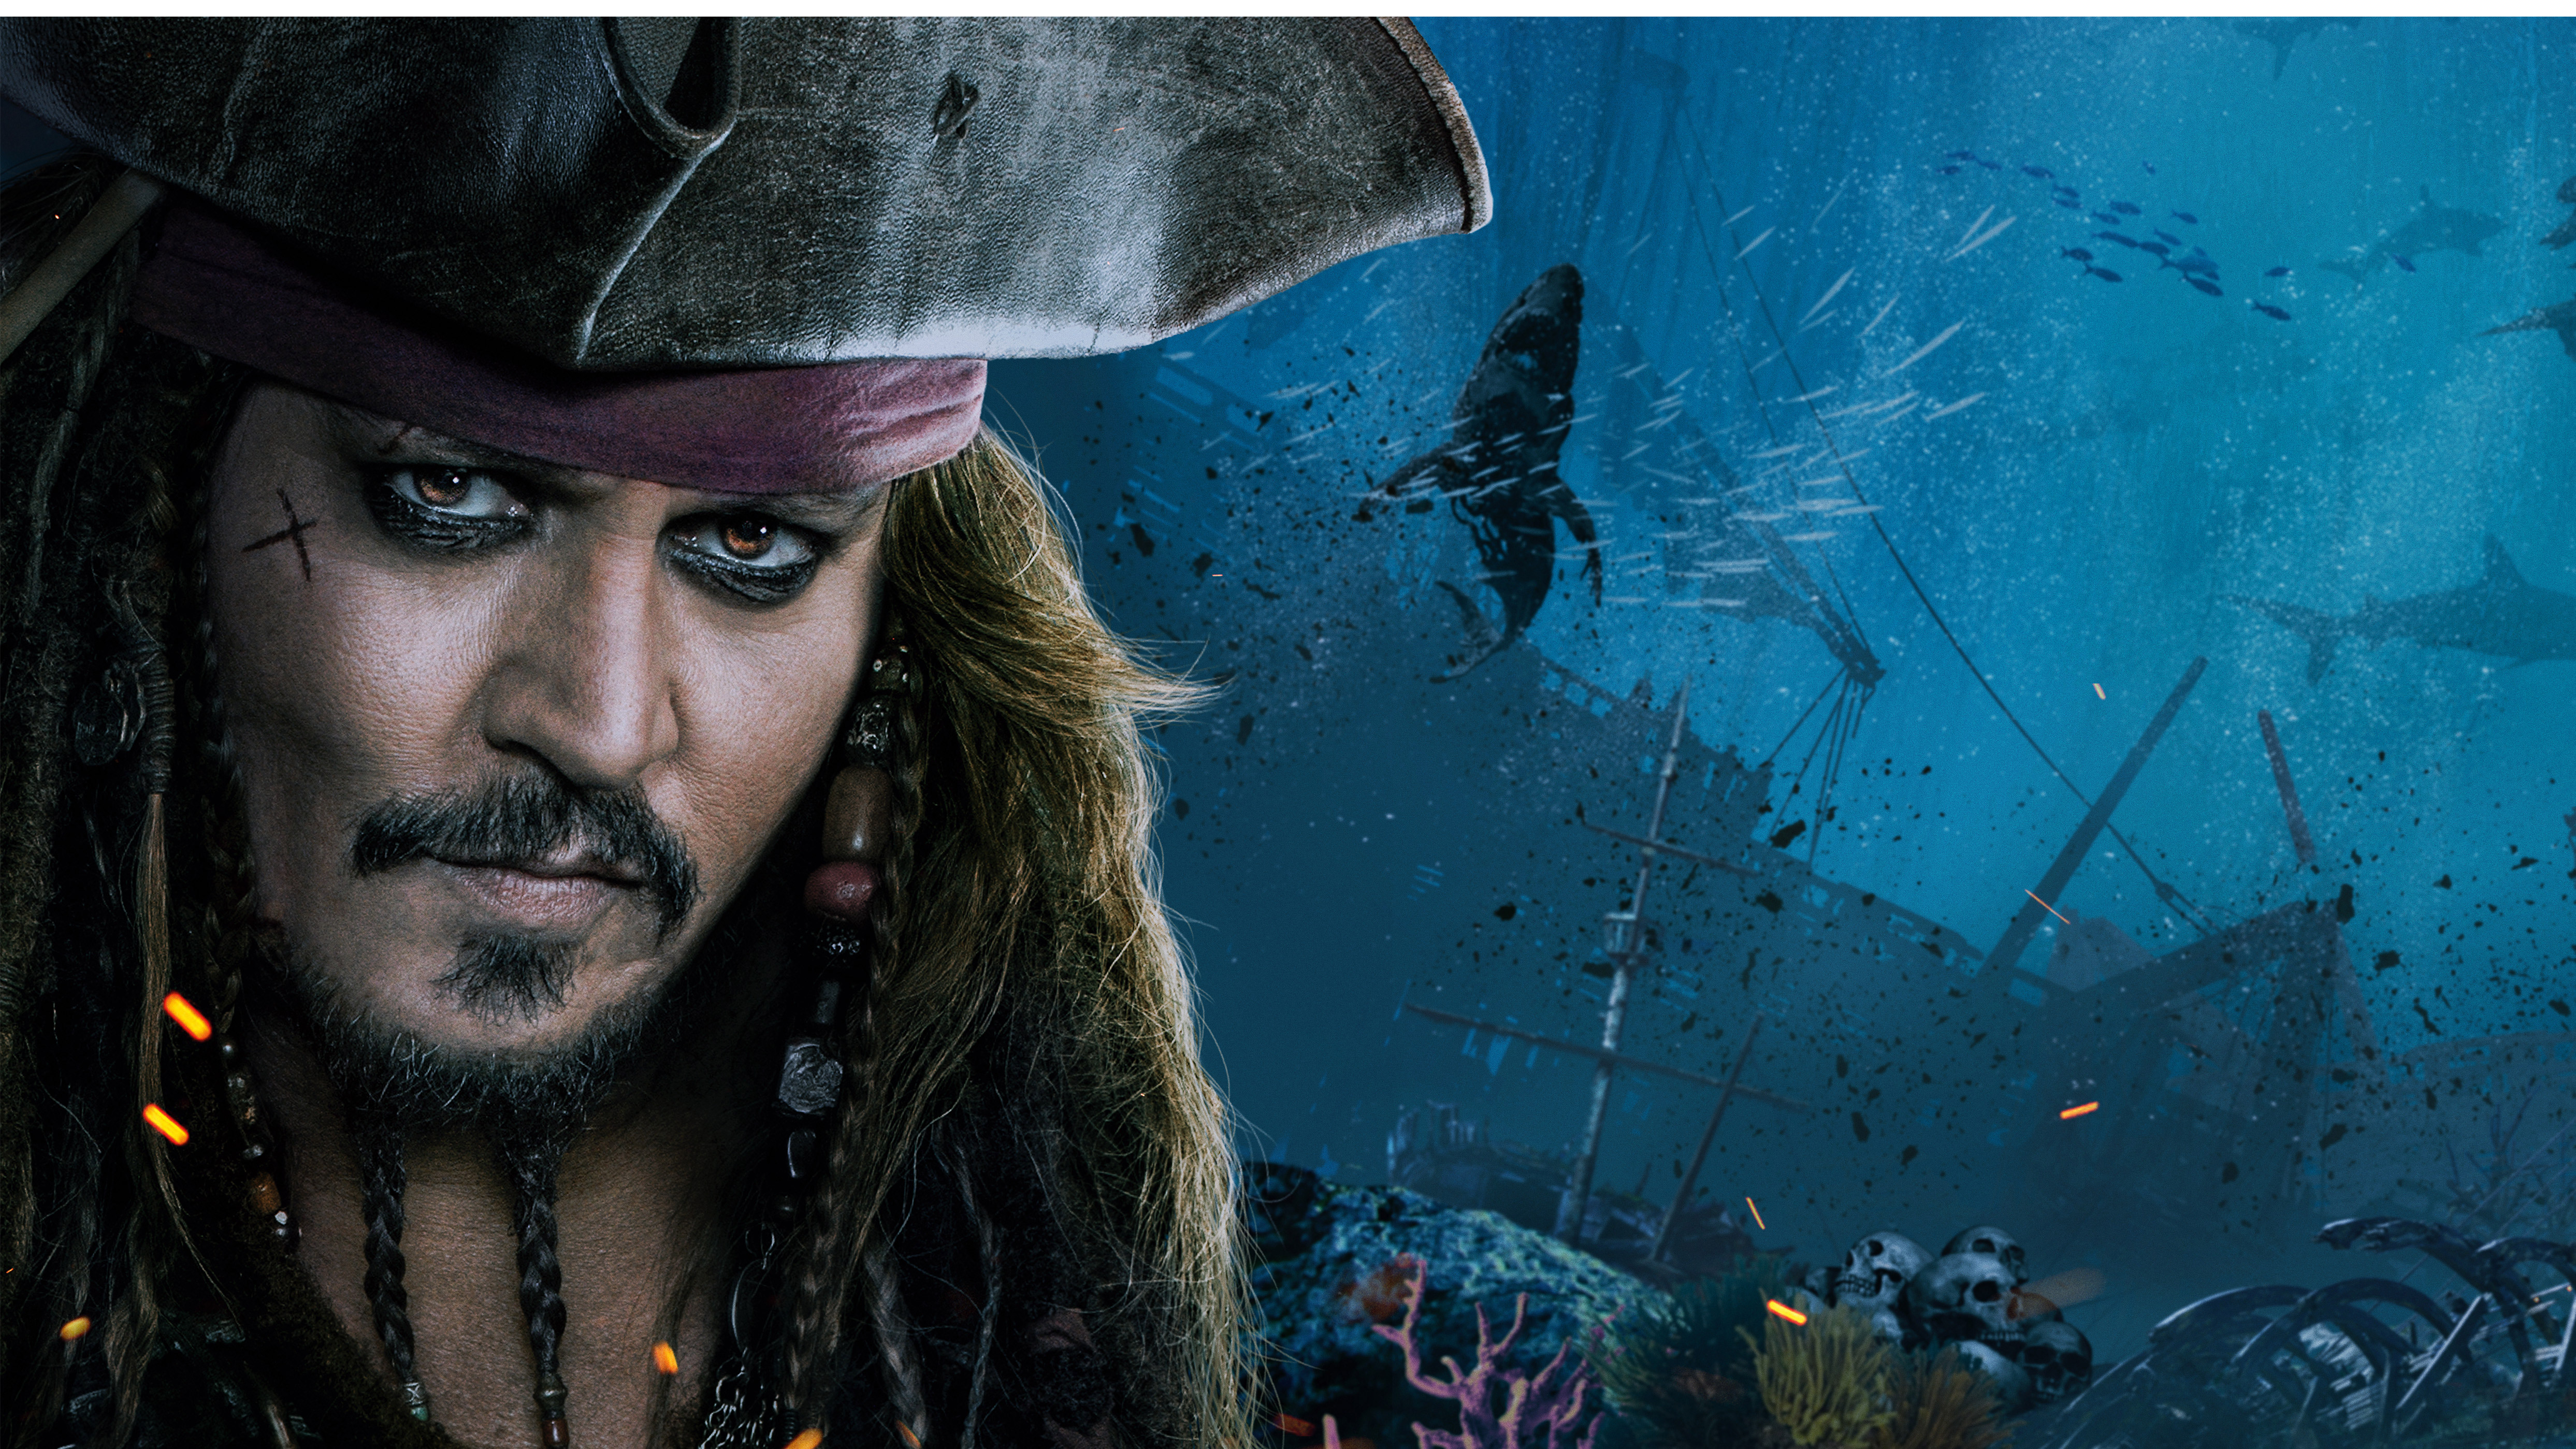 pirates of the caribbean 4 full movie free download in hindi hd